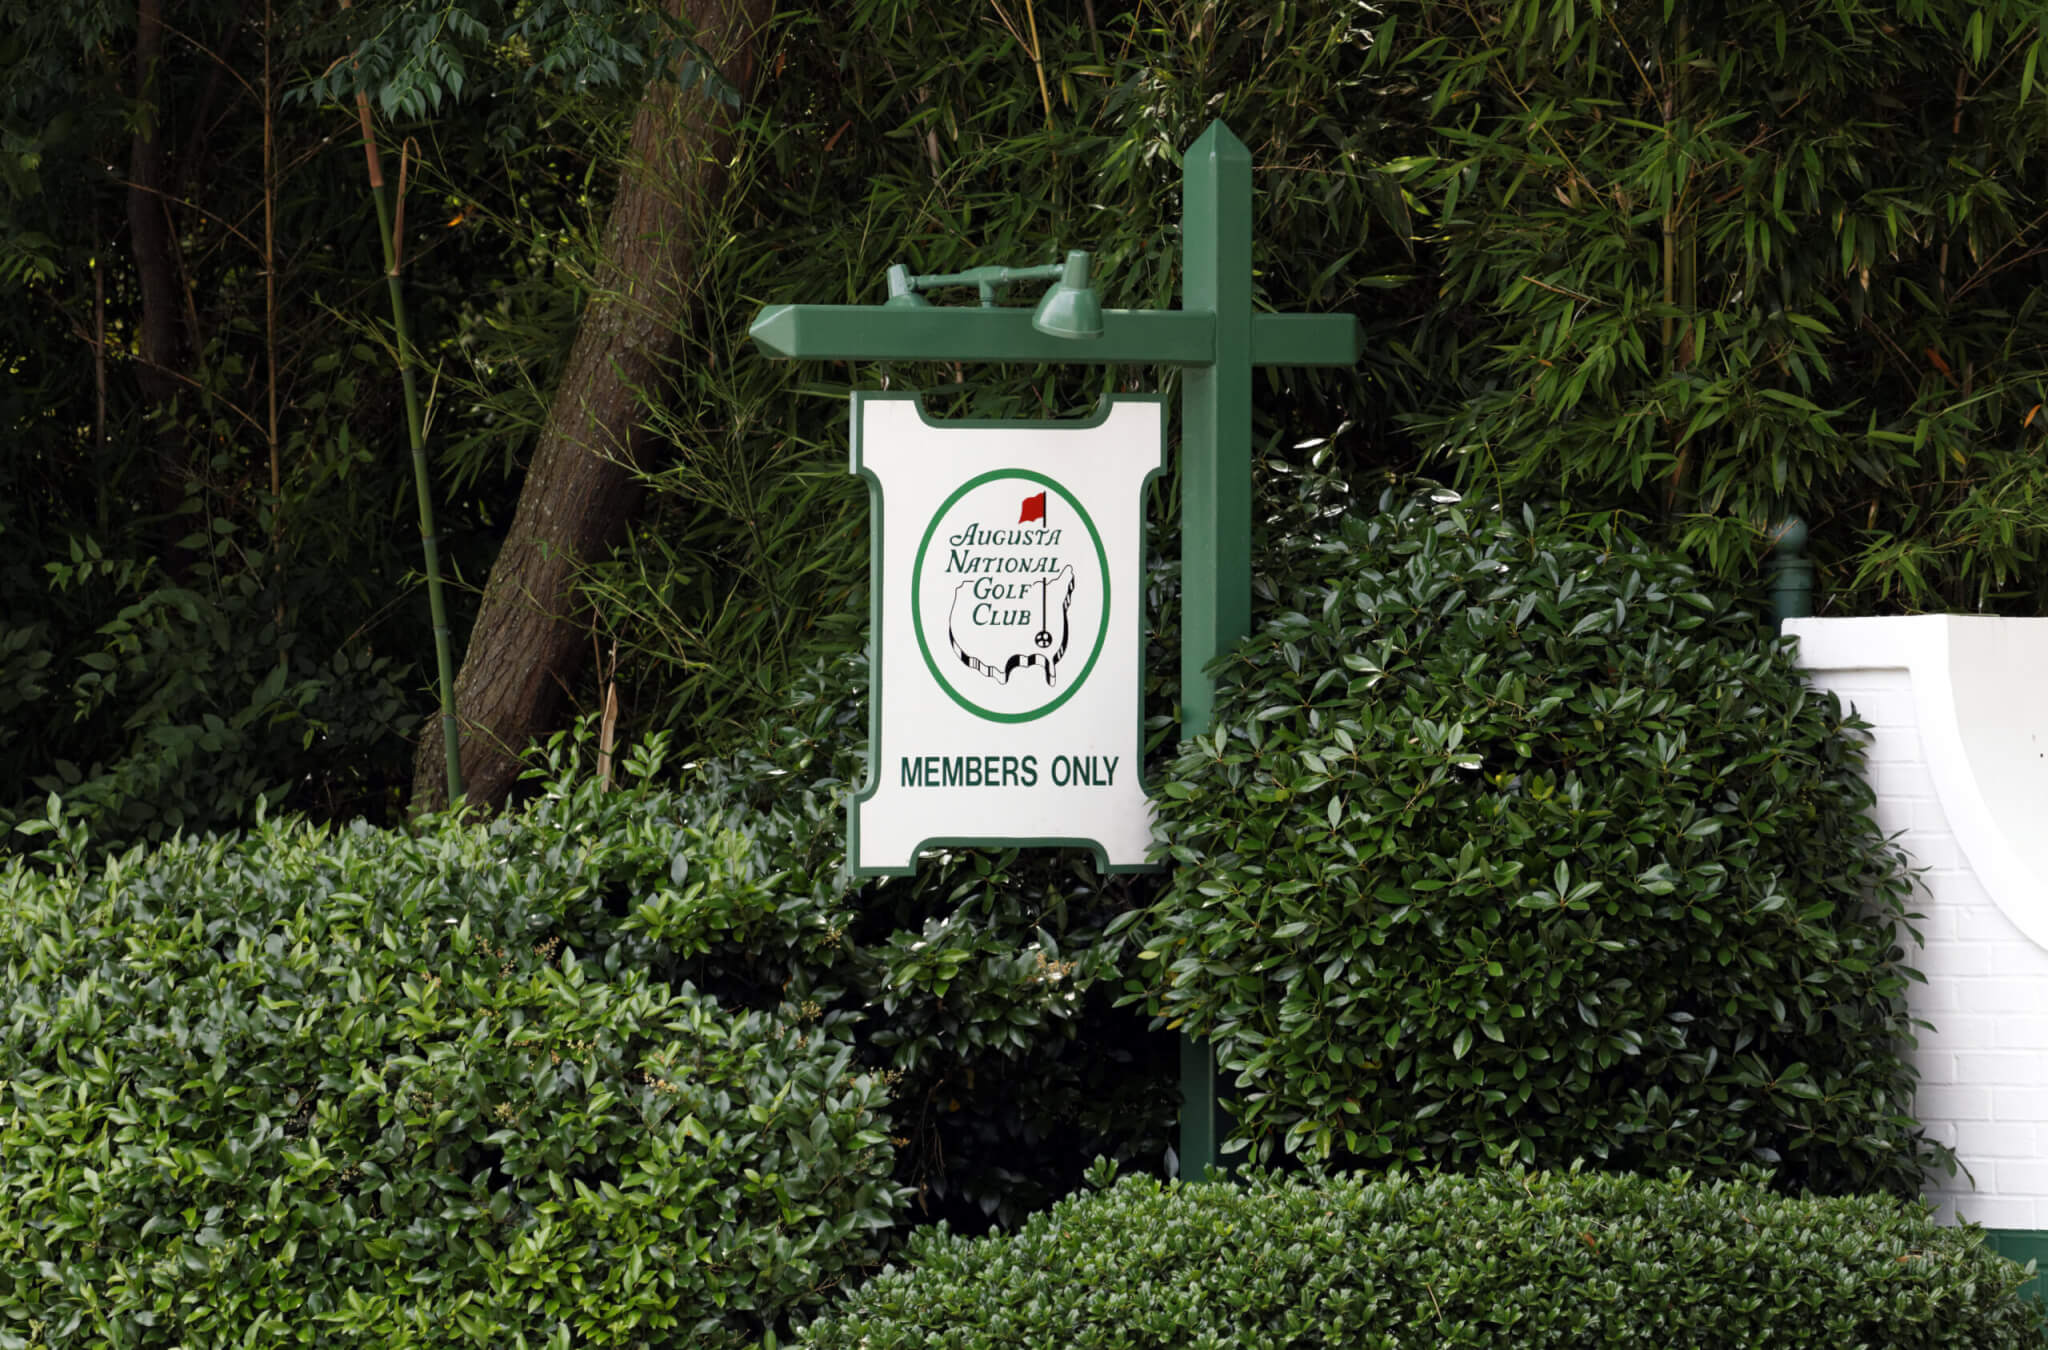 Entrance to Augusta National Golf Club, Home Of The Masters